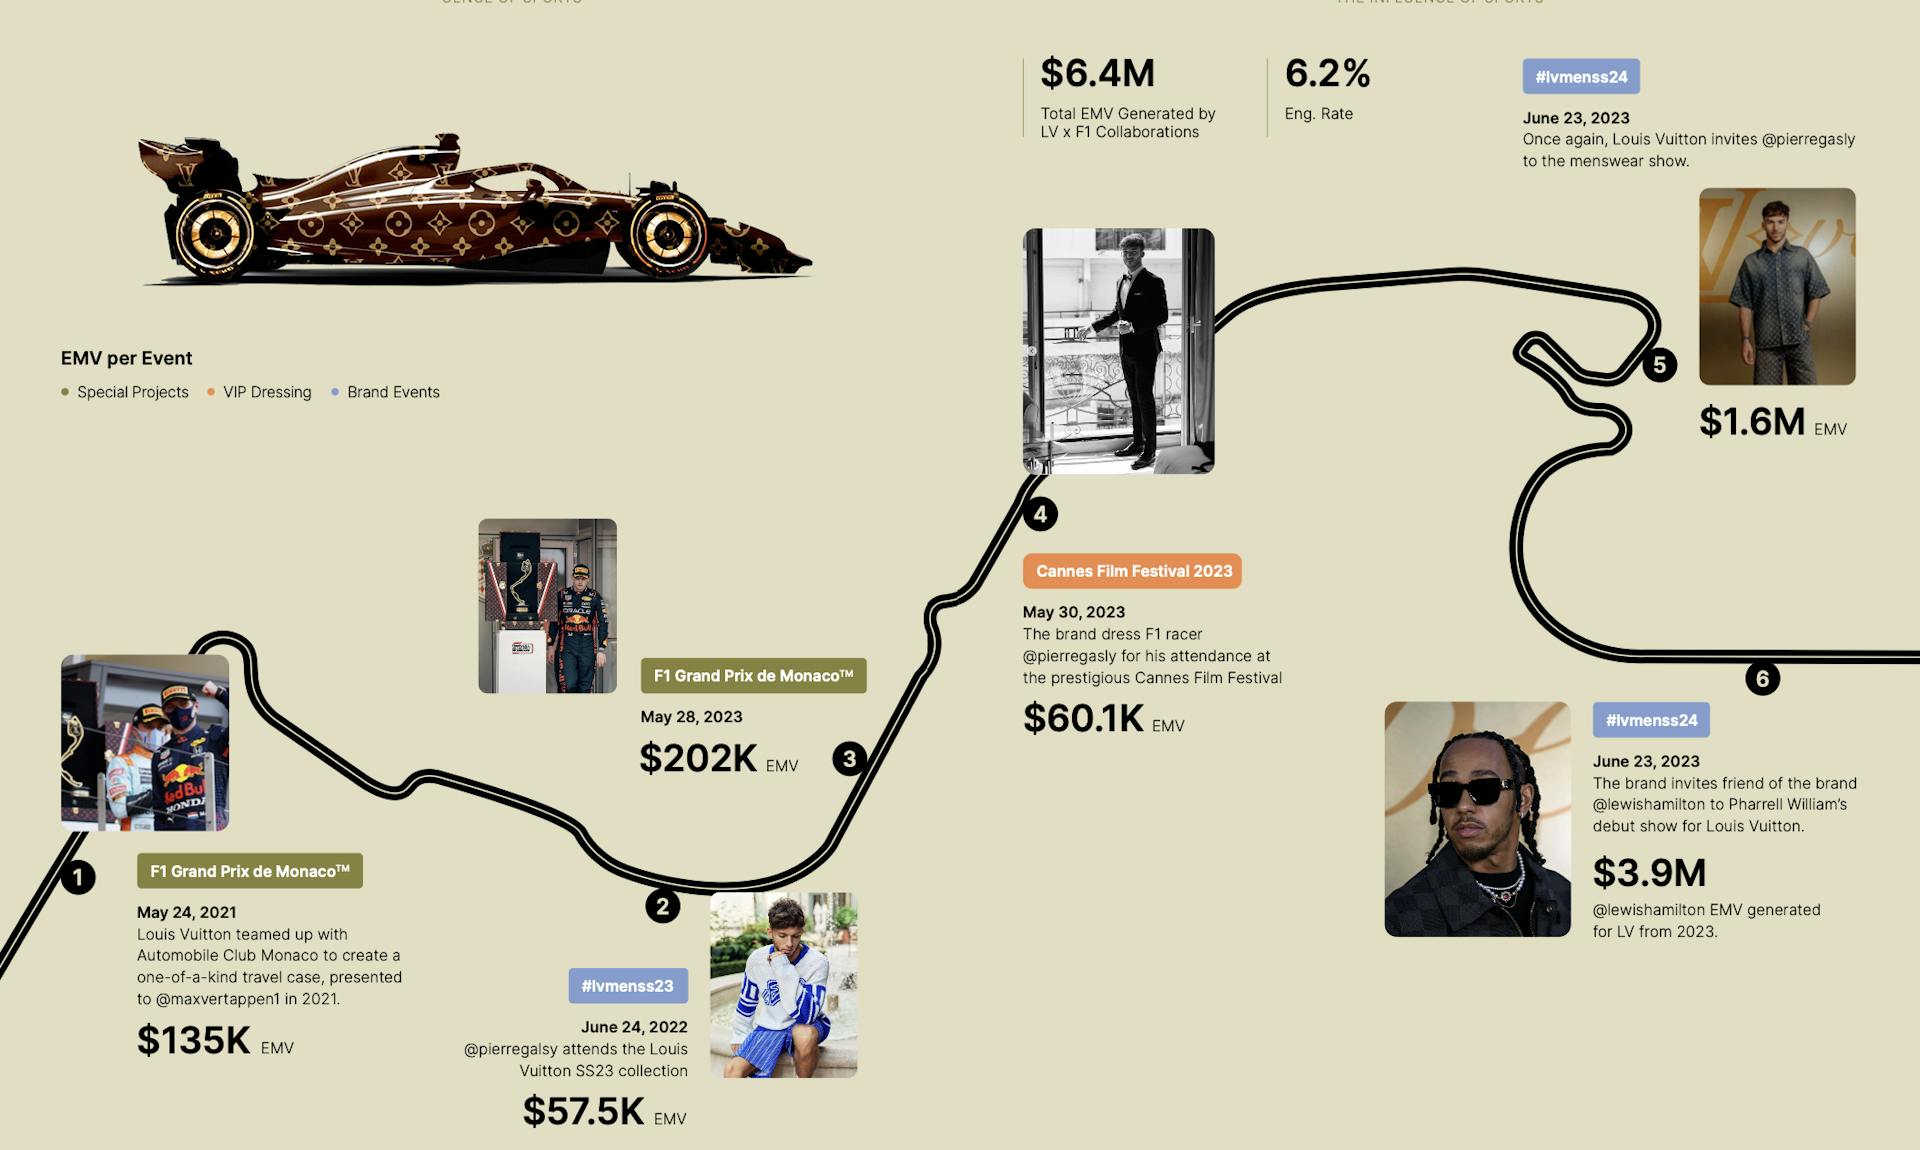 Timeline of Louis Vuitton's partnerships with F1 drivers.